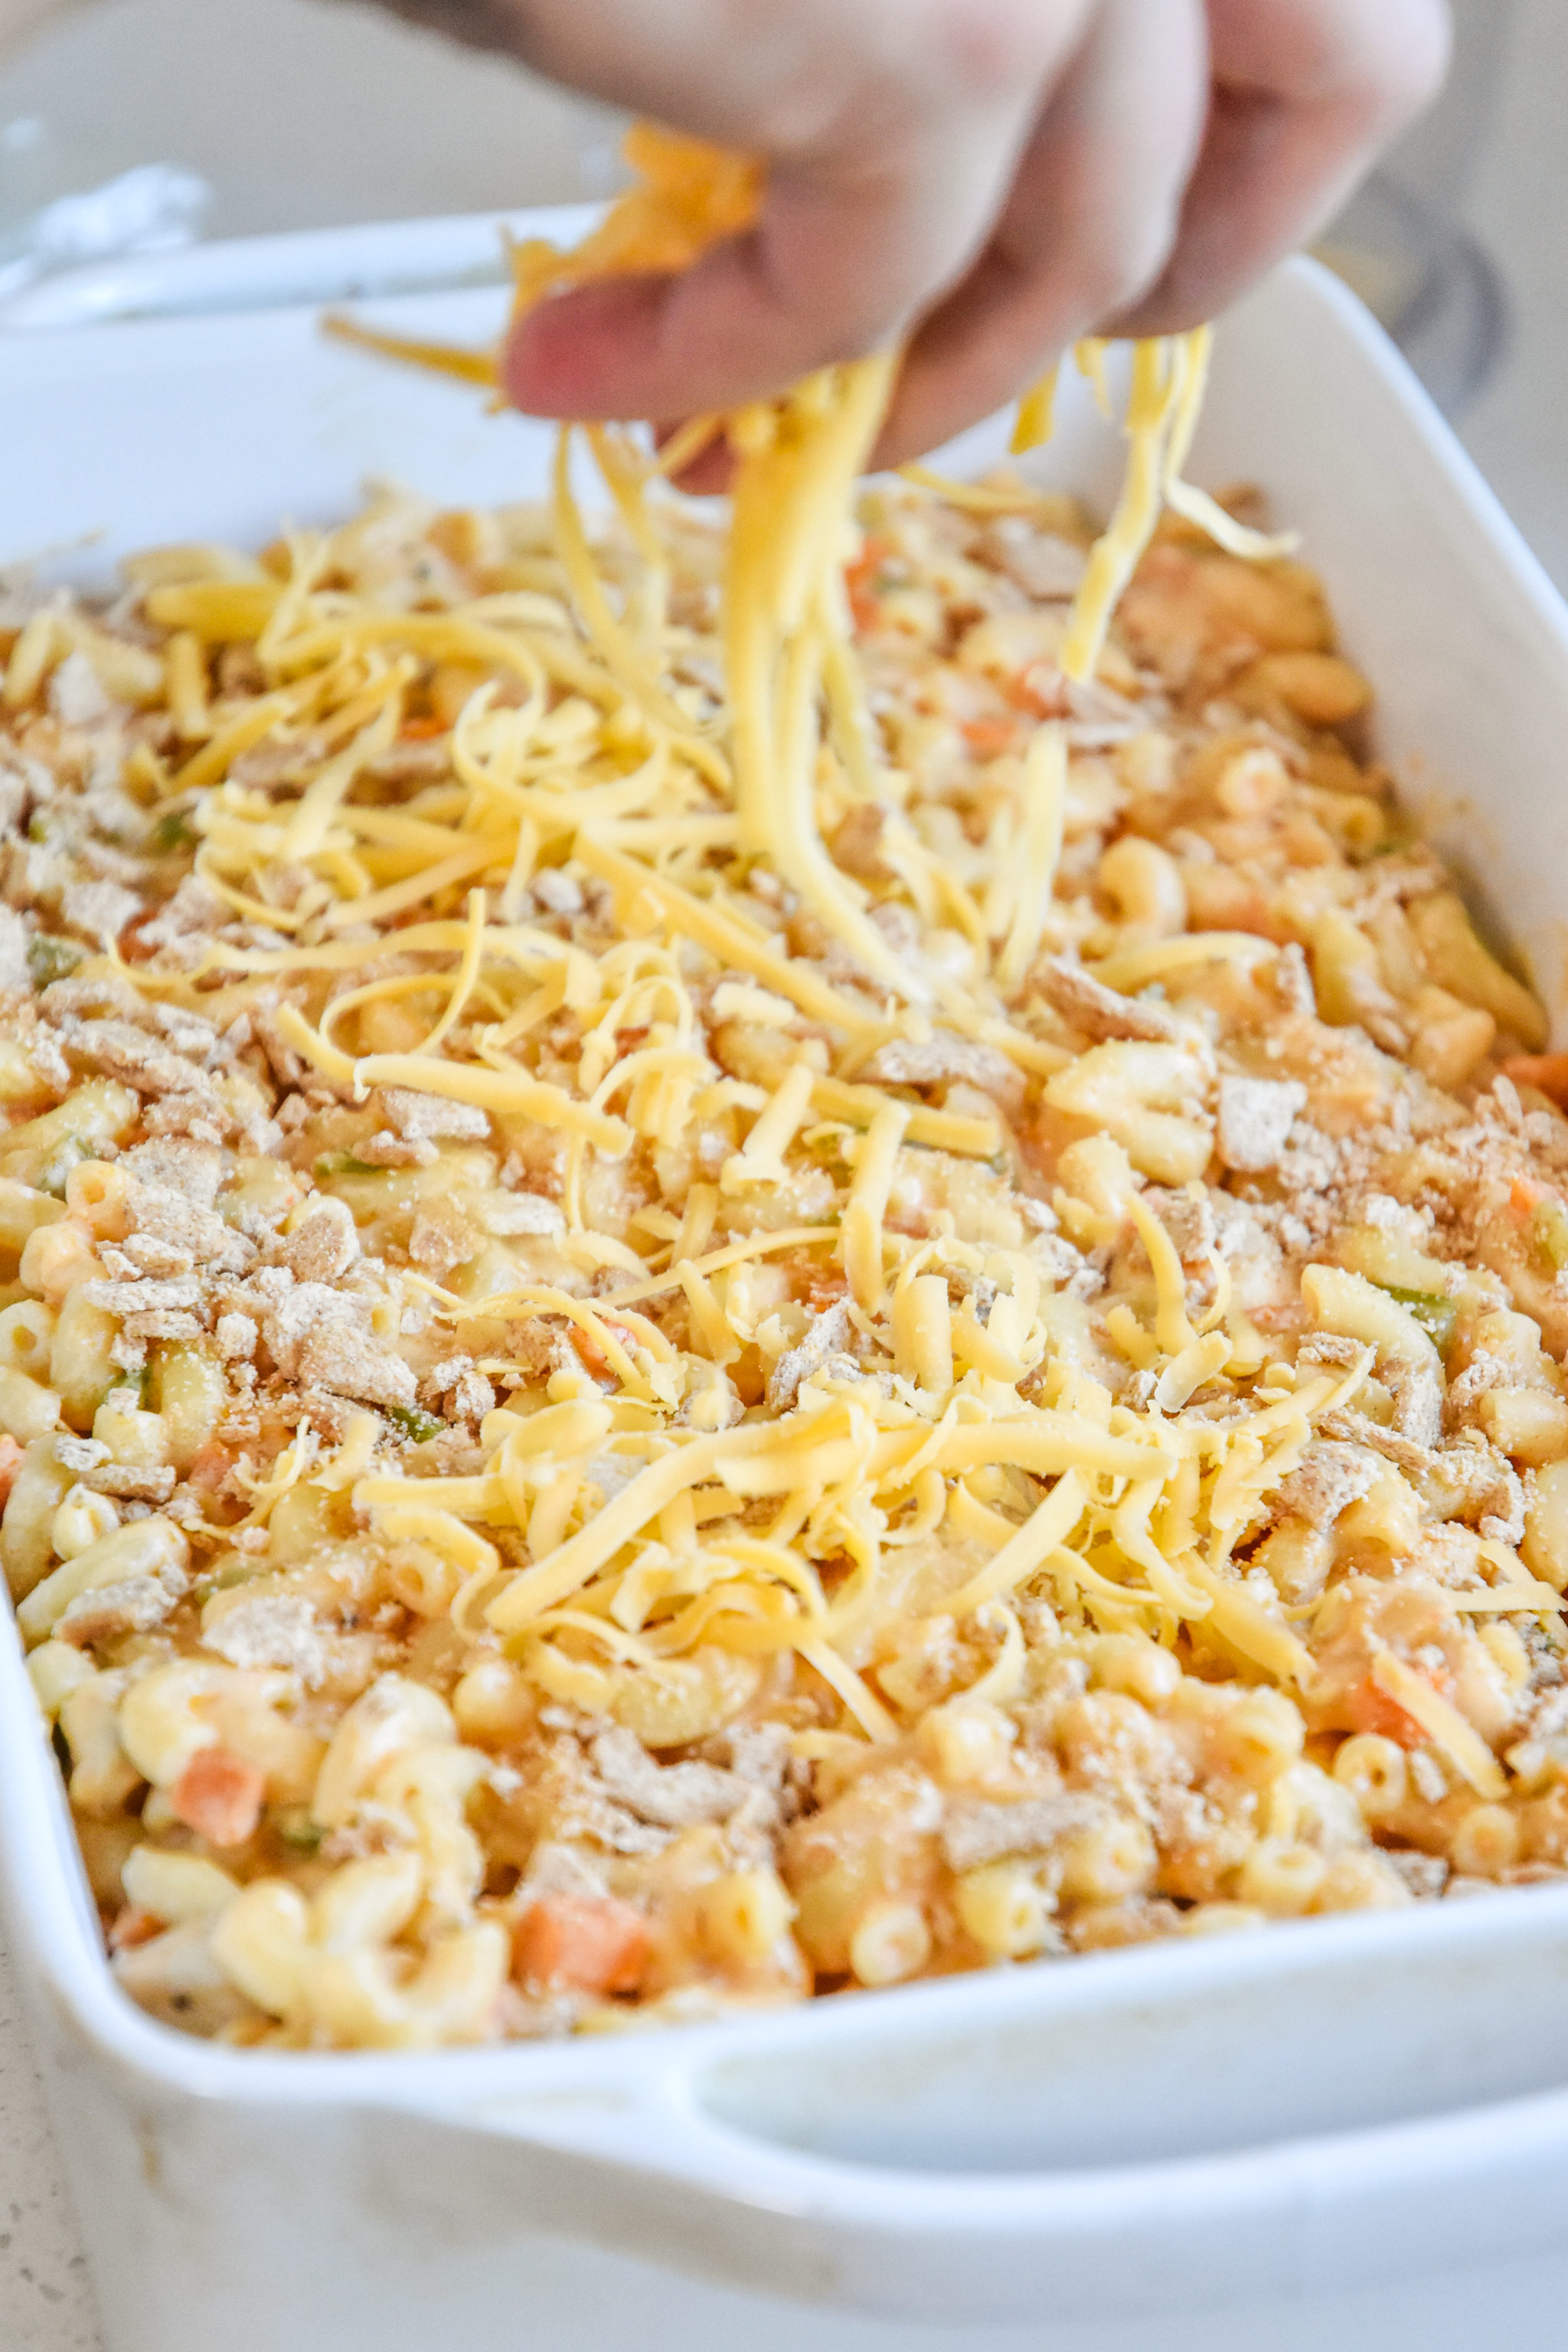 sprinkling cheese on top of the casserole